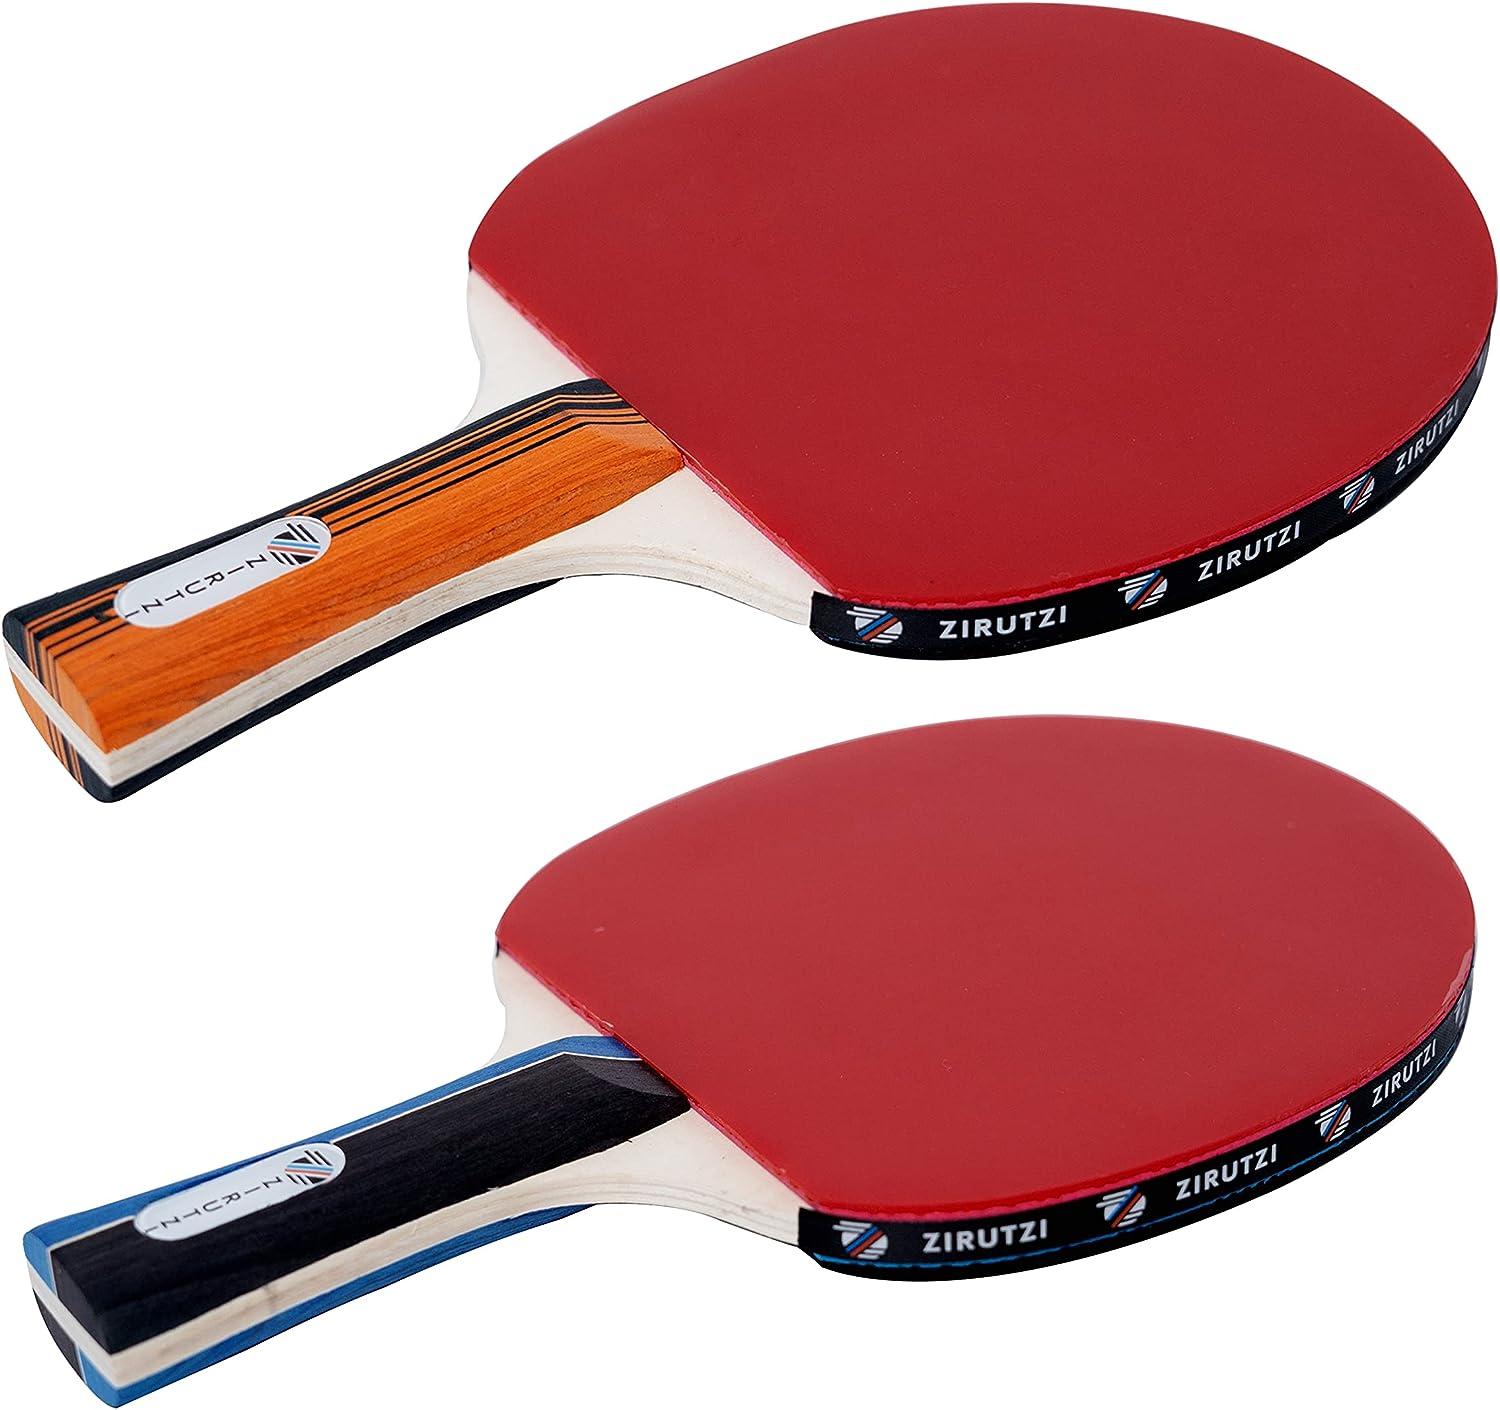 Ping Pong Paddle Set, Table Tennis Set with 3 Balls,Beginner Table Tennis  Racket Set, Optimize Rotate and Control, for Indoor Outdoor Play 